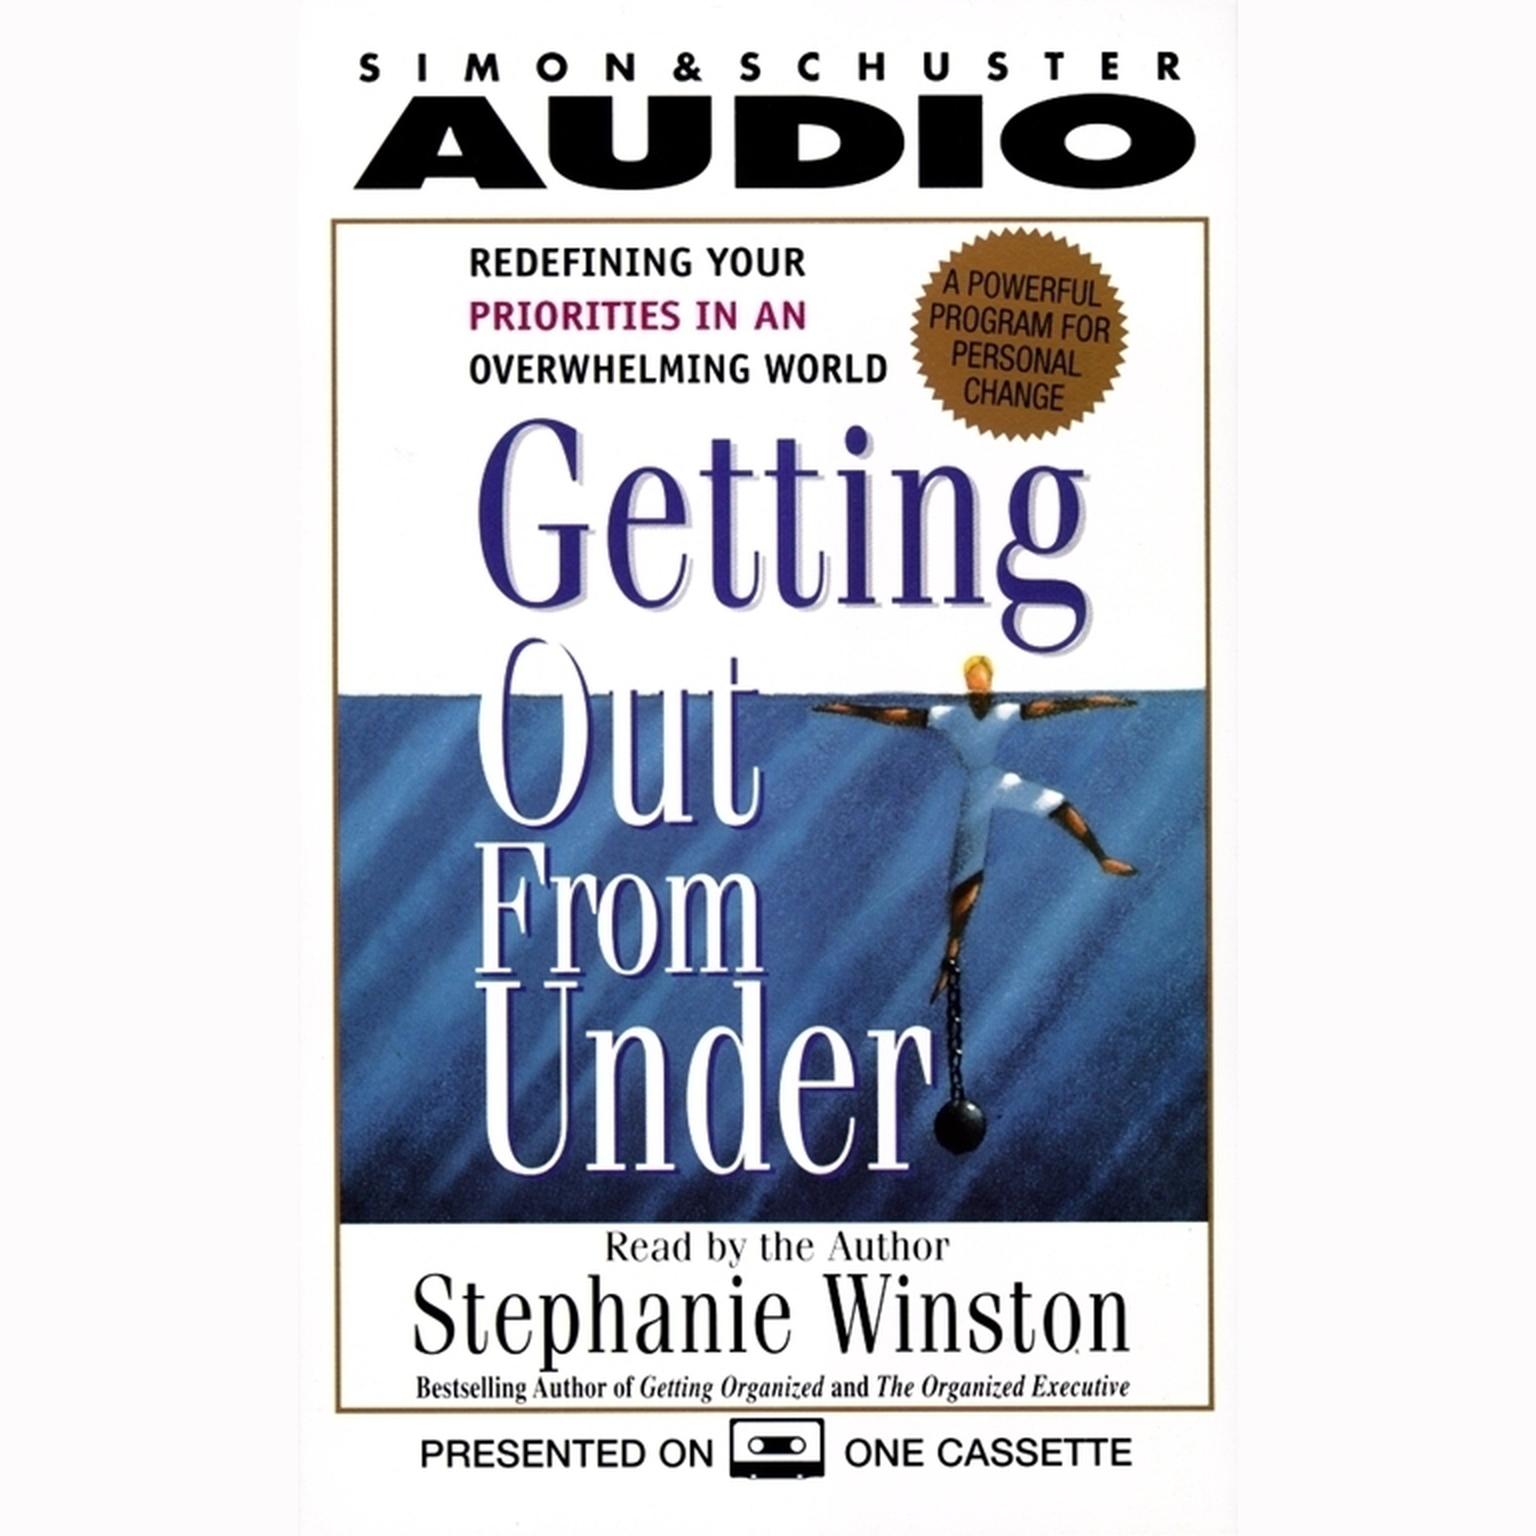 Getting Out from Under (Abridged): Redefining Your Priorities in an Overwhelming World: A Powerful Program for Personal Change Audiobook, by Stephanie Winston